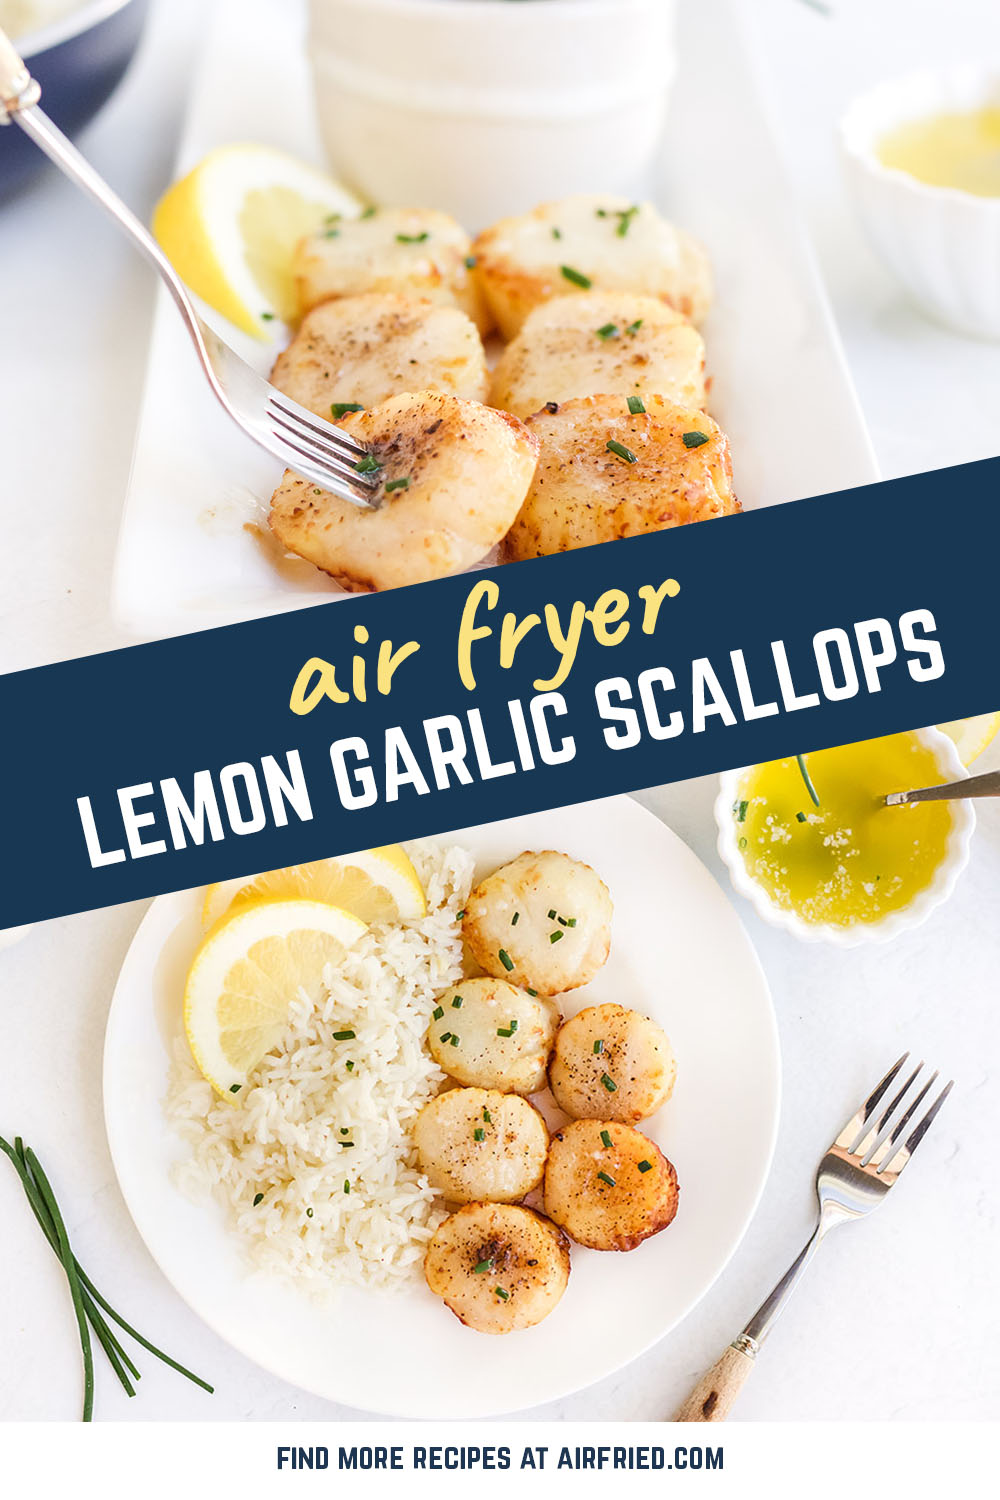 Lemon garlic scallops are very easy to cook with only 5 minutes of prep time! The air fryer makes it so easy. #airfried #easydinners #scallops